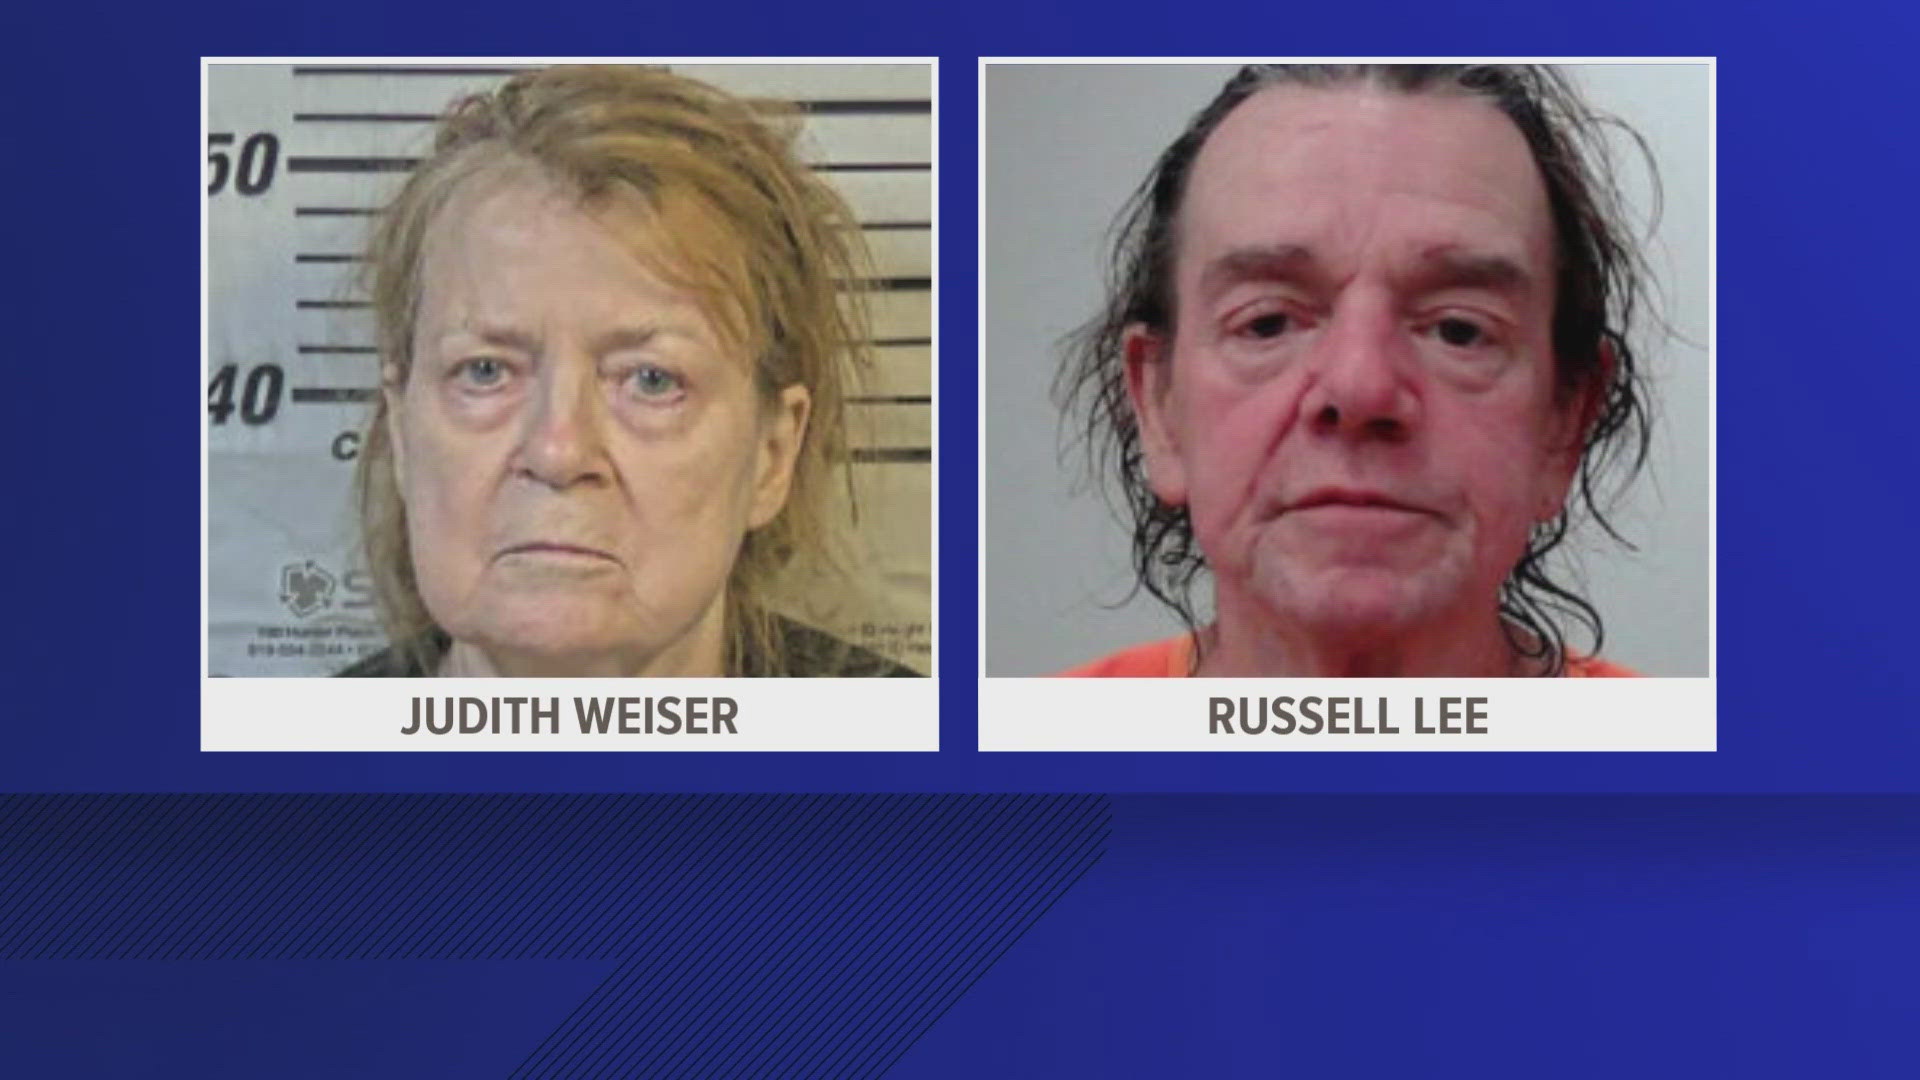 Russel Lee and Judith "Judy" Weiser have been charged with the murder of Paula Boudreaux, who was 22 years old at the time of her death in 1986.